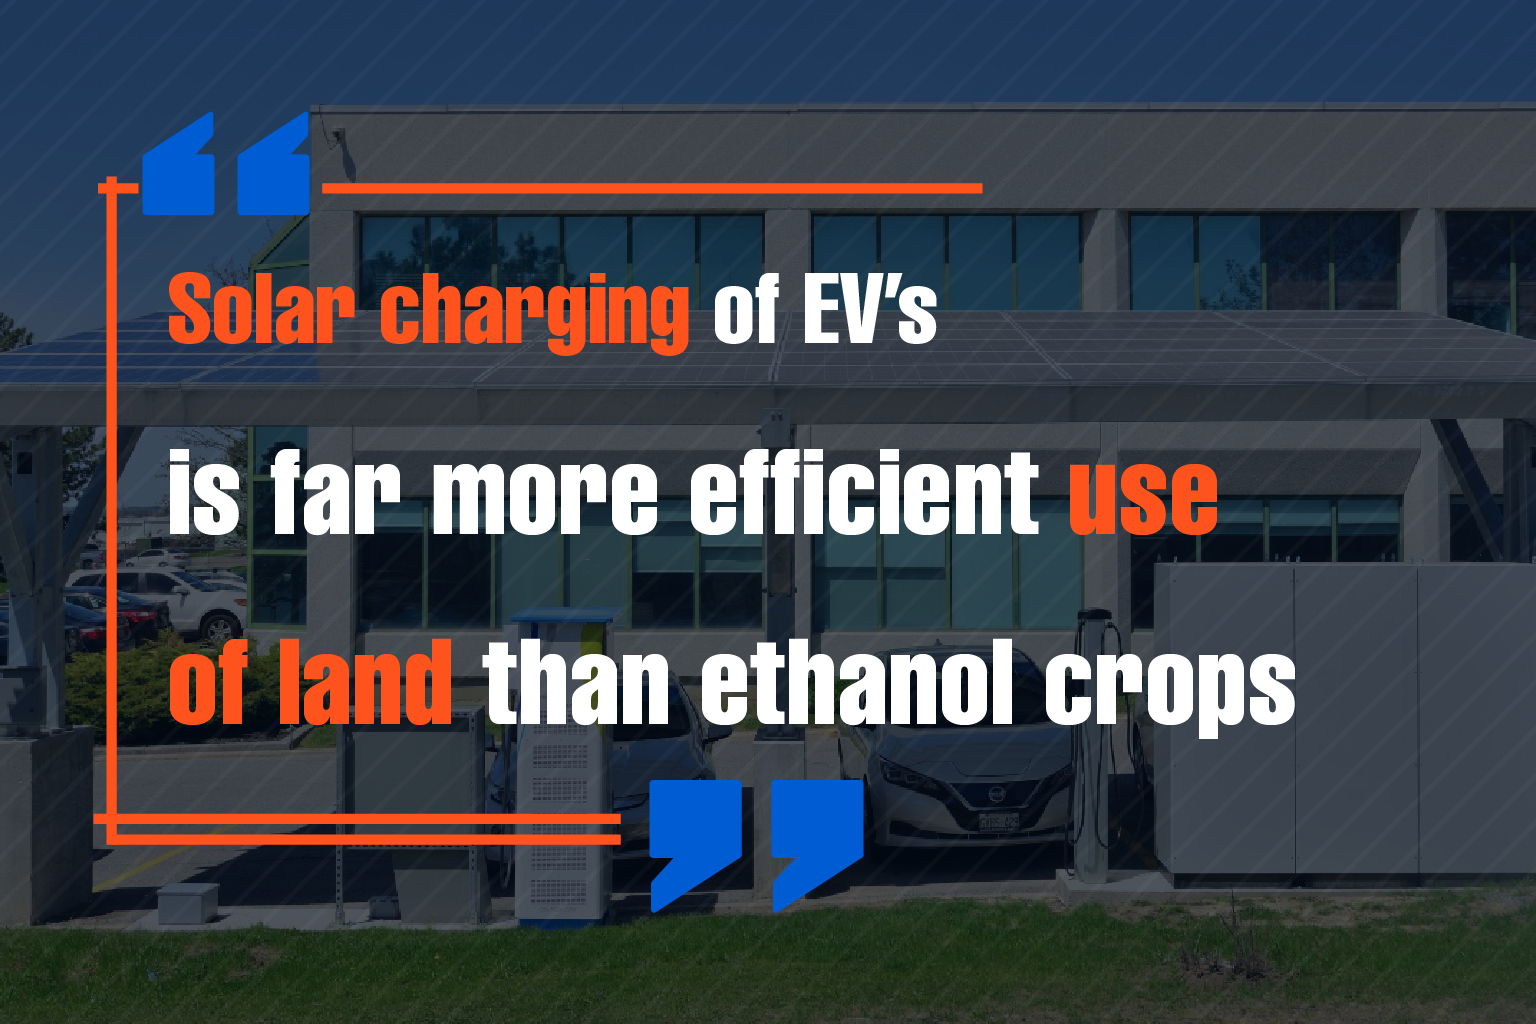 Solar charging of EVâ€™s is far more efficient use of land than ethanol crops